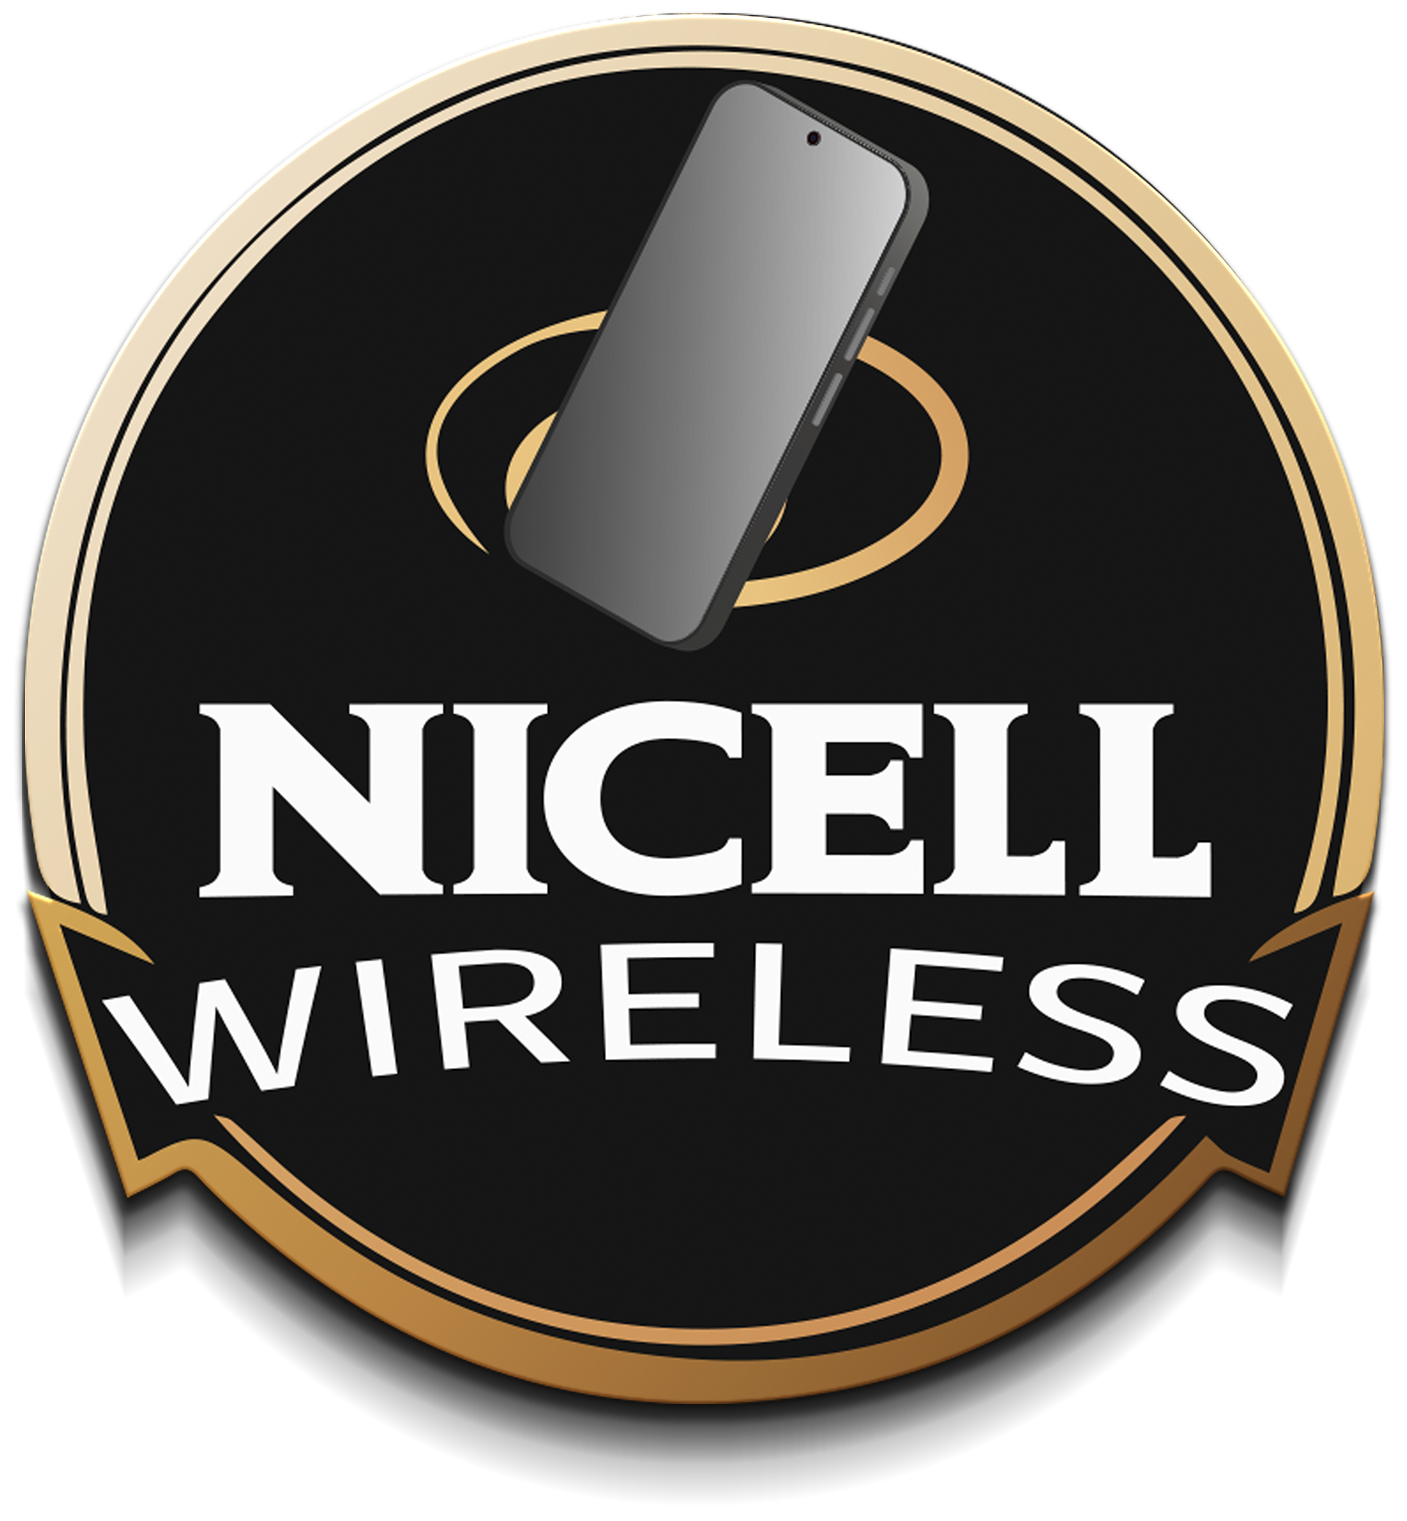 A nicell wireless logo with a cell phone on it